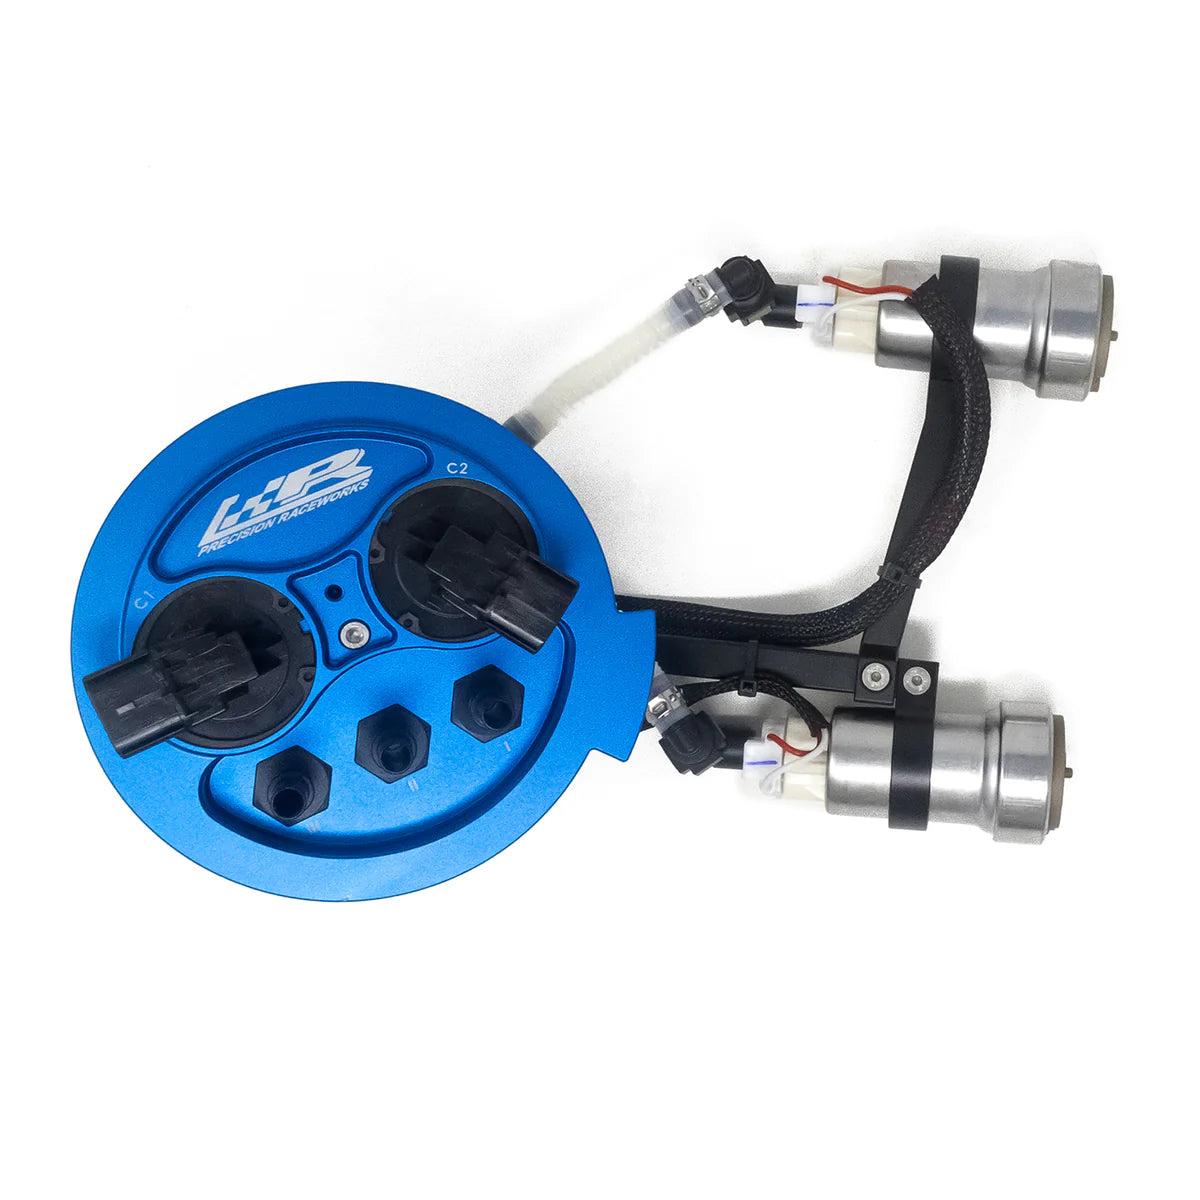 Precision Racewerks S58 Stand Alone Auxiliary Fuel System (G8X / G2X)